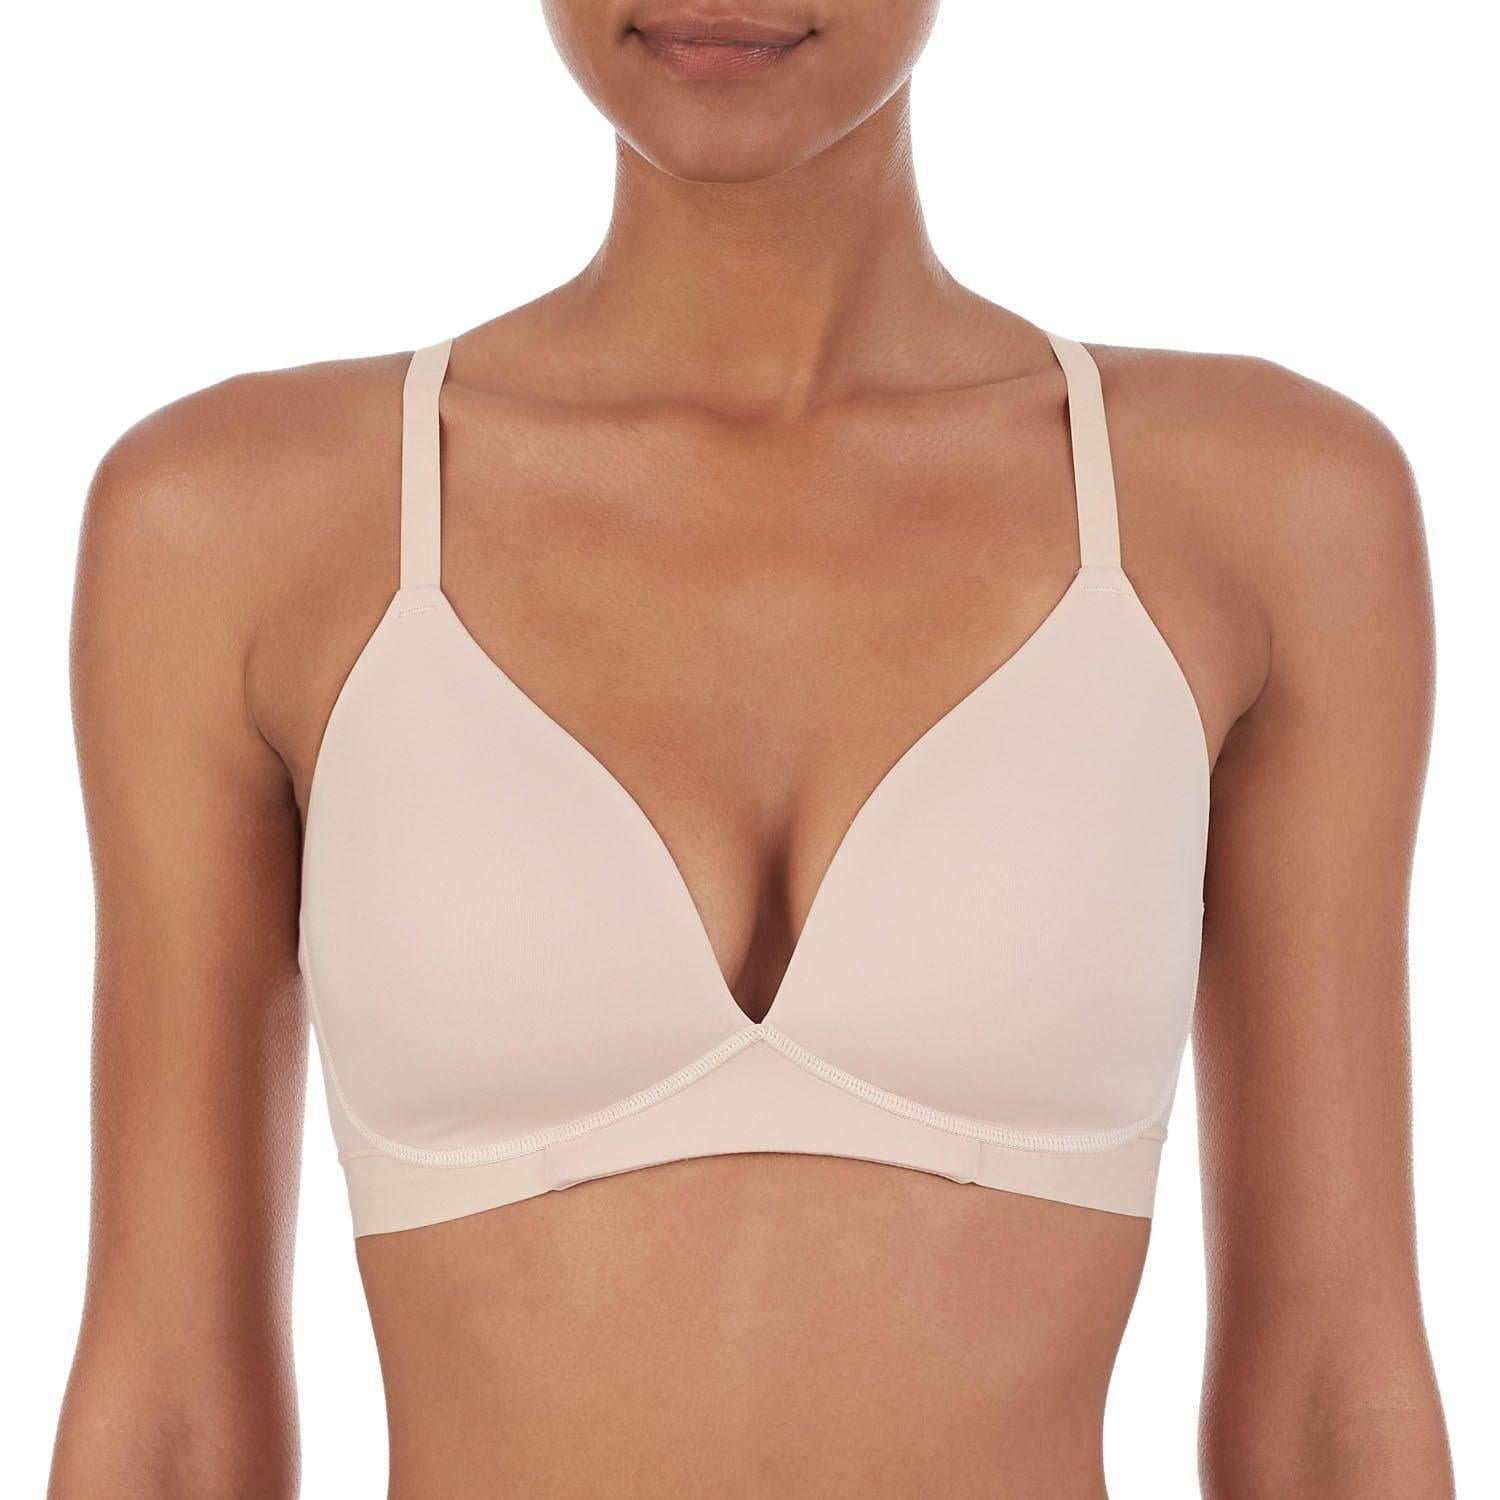 Luxury Women Sexy Bra Underwear Lingerie with soft cup without wires DKNY  95195 - buy at